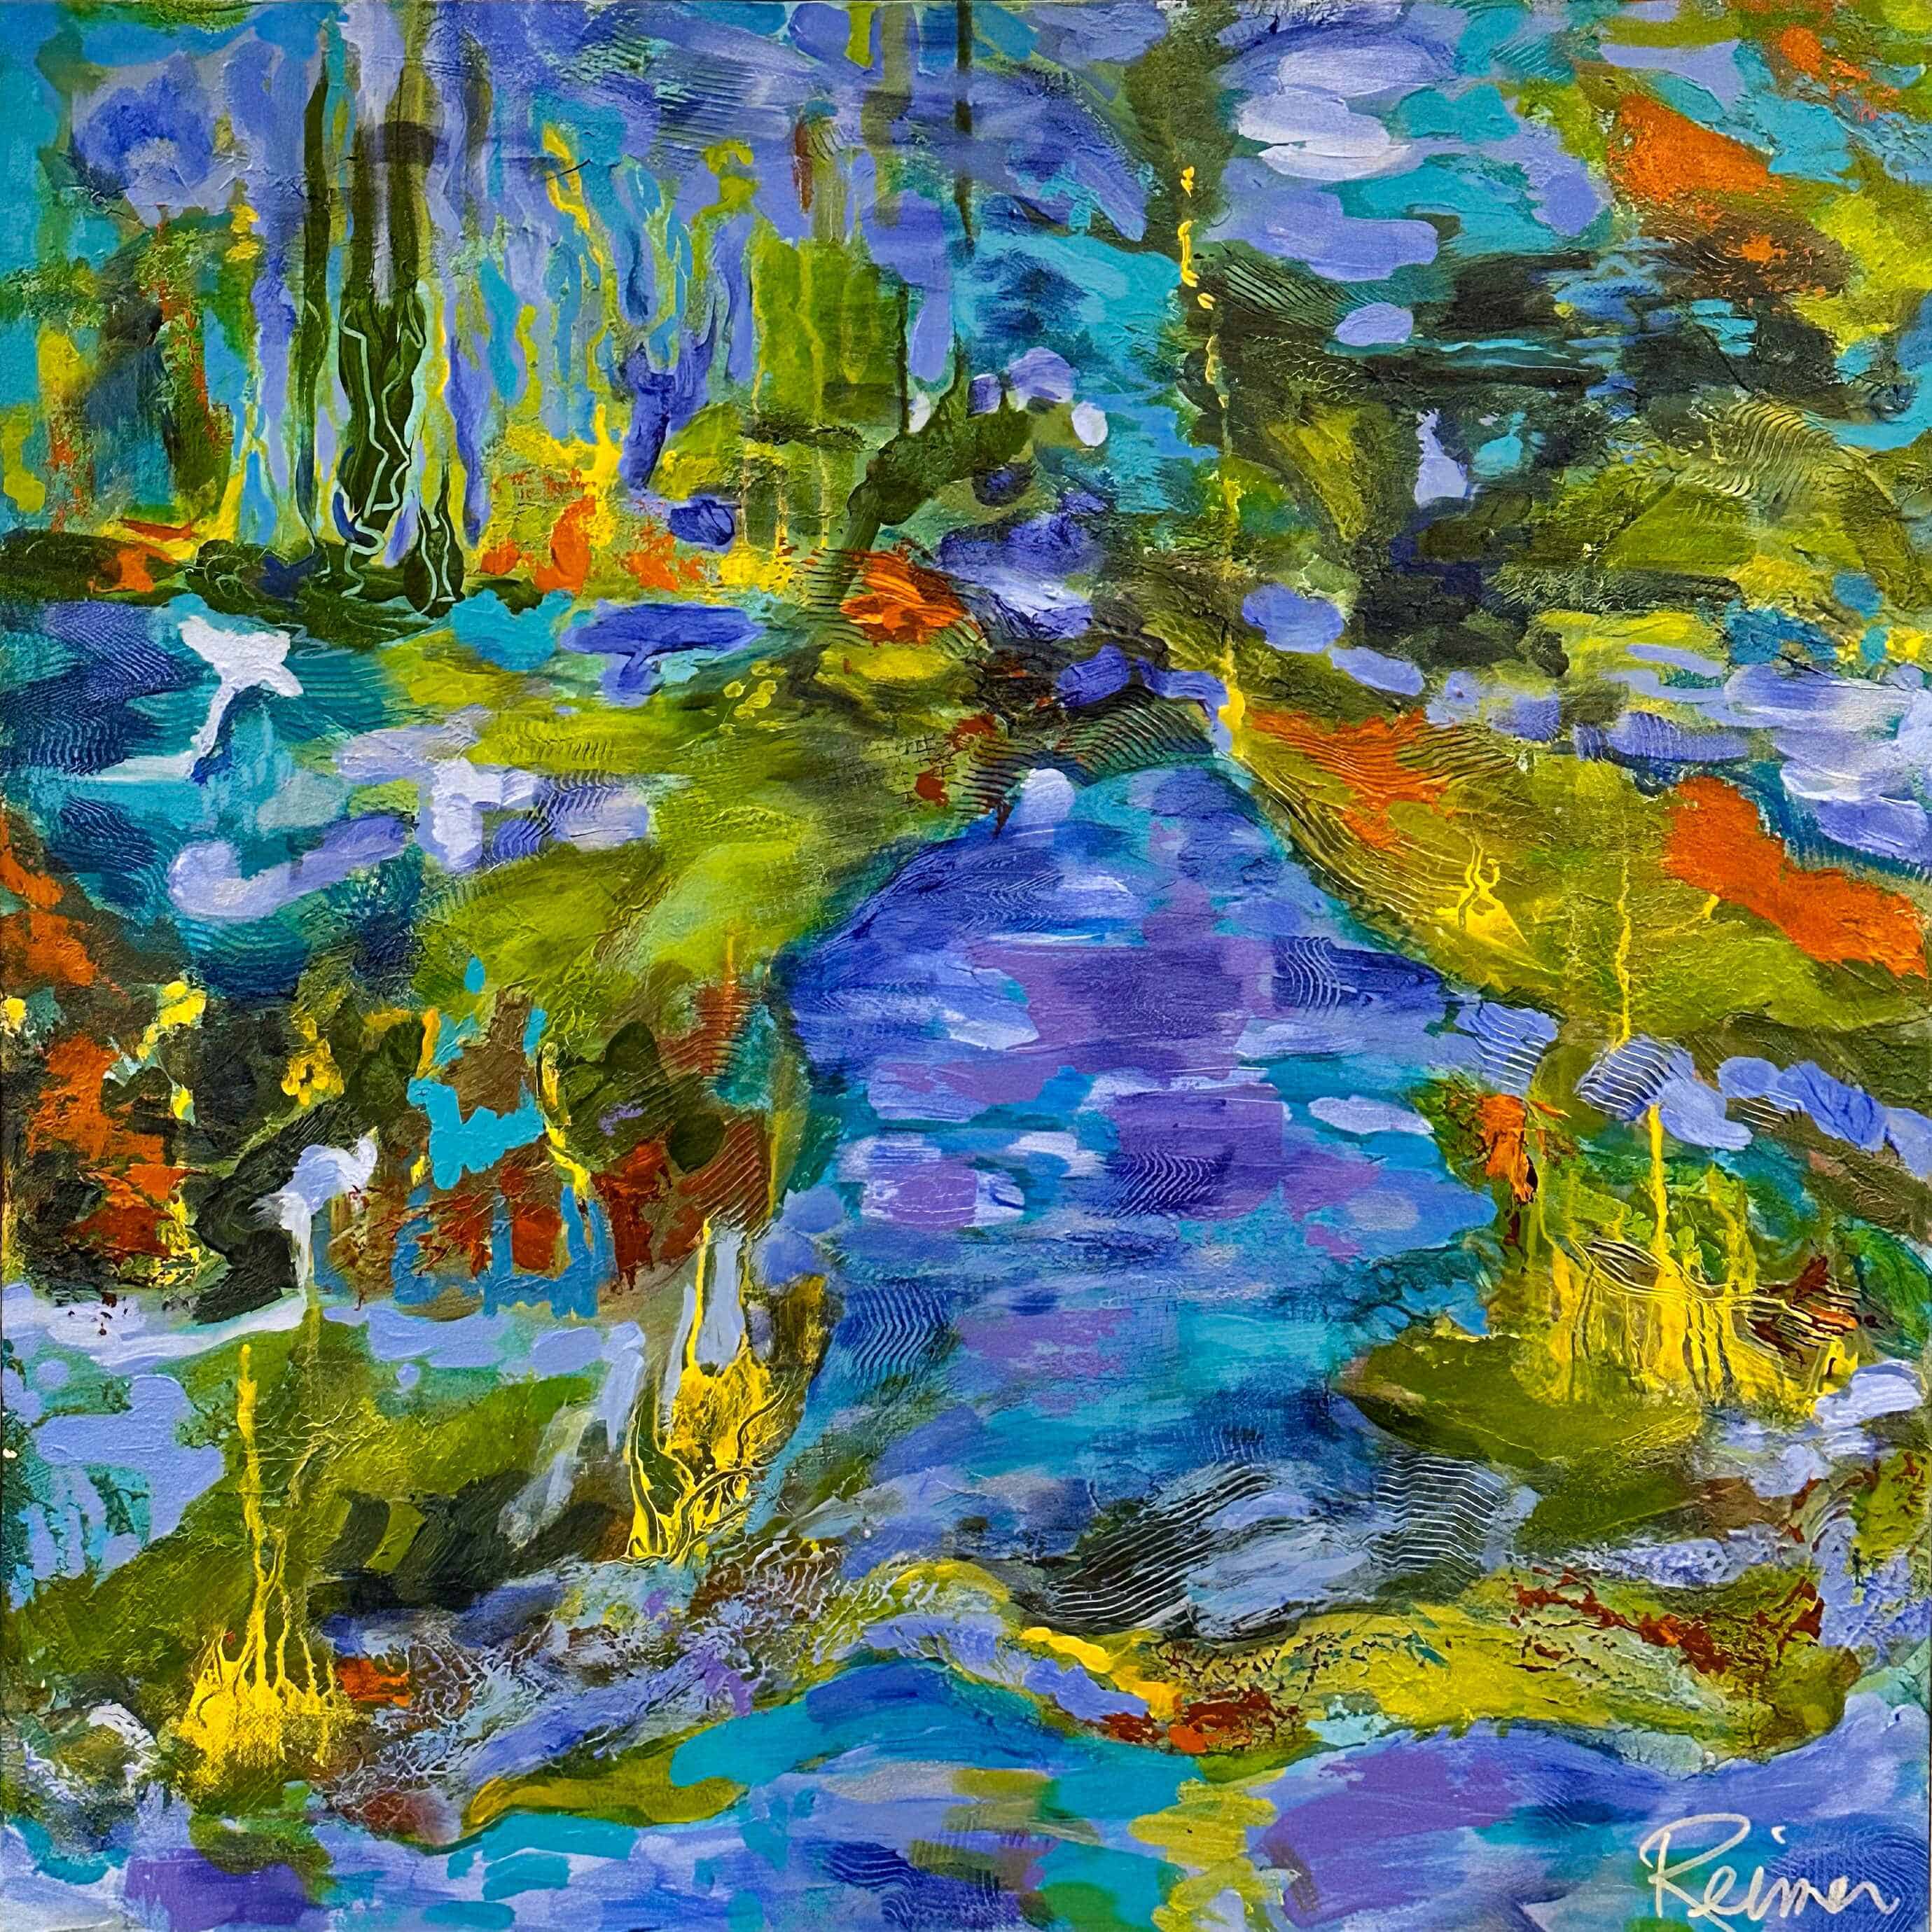 Abstract Art. Title: Ophelia's Dream, Acrylic on Canvas, 30 x 30 in by Contemporary Canadian Artist Christine Reimer.